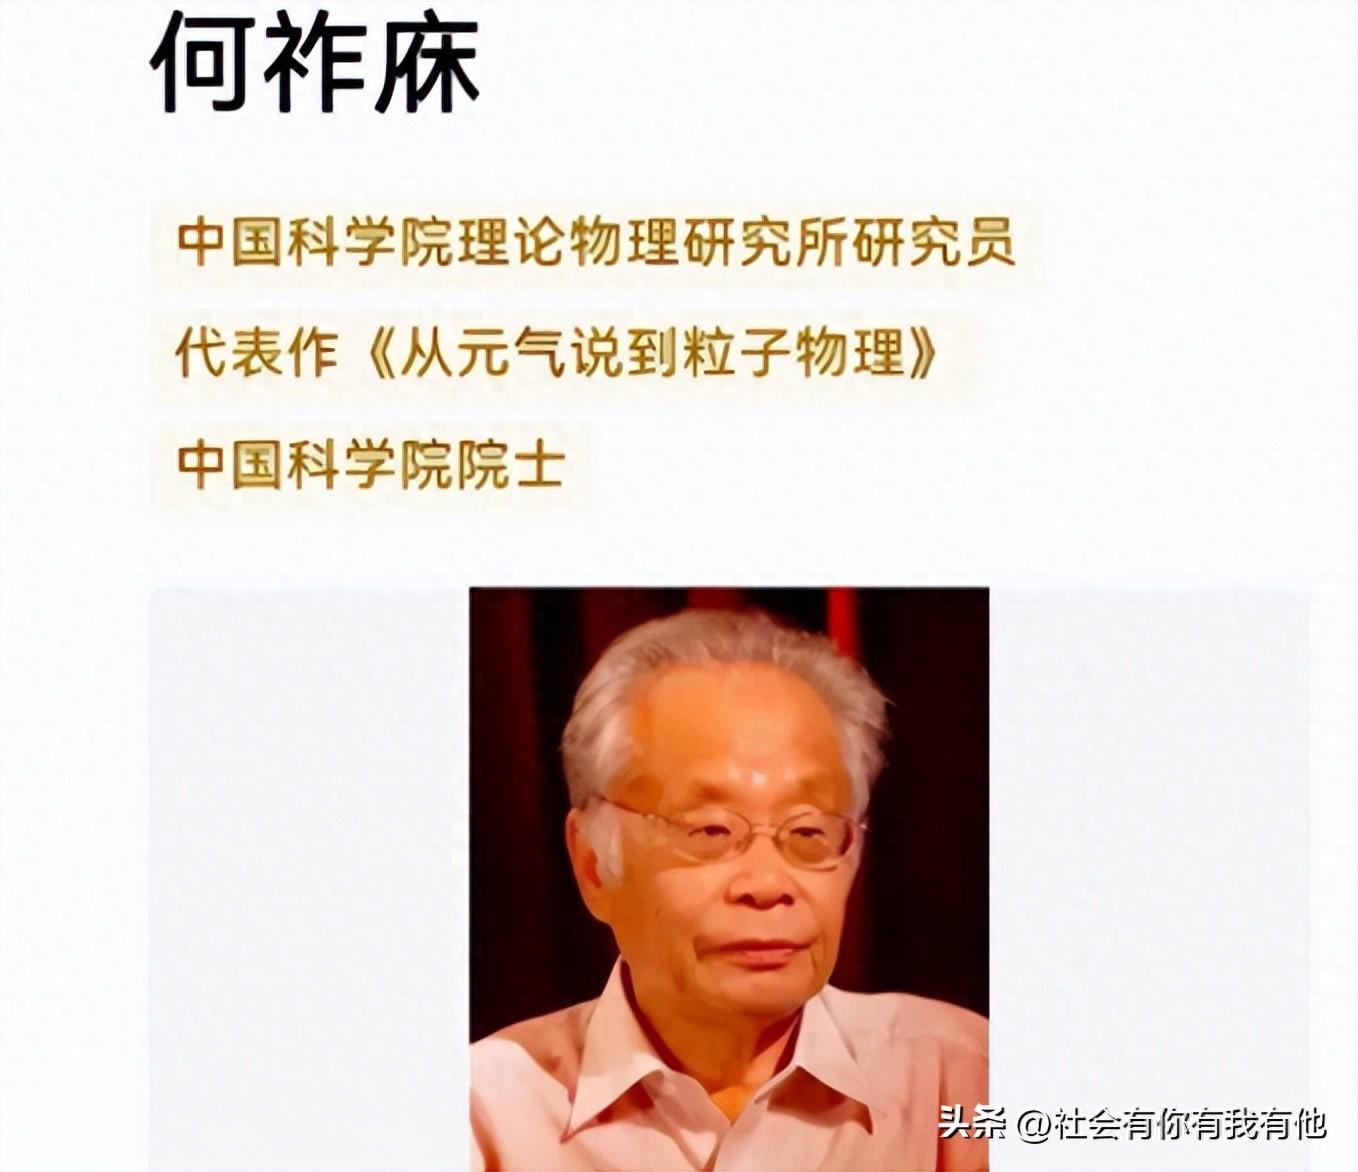 He Zuoxiu, who opposes traditional Chinese medicine, damages Huawei, and breaks free from the reins, has no bottom line